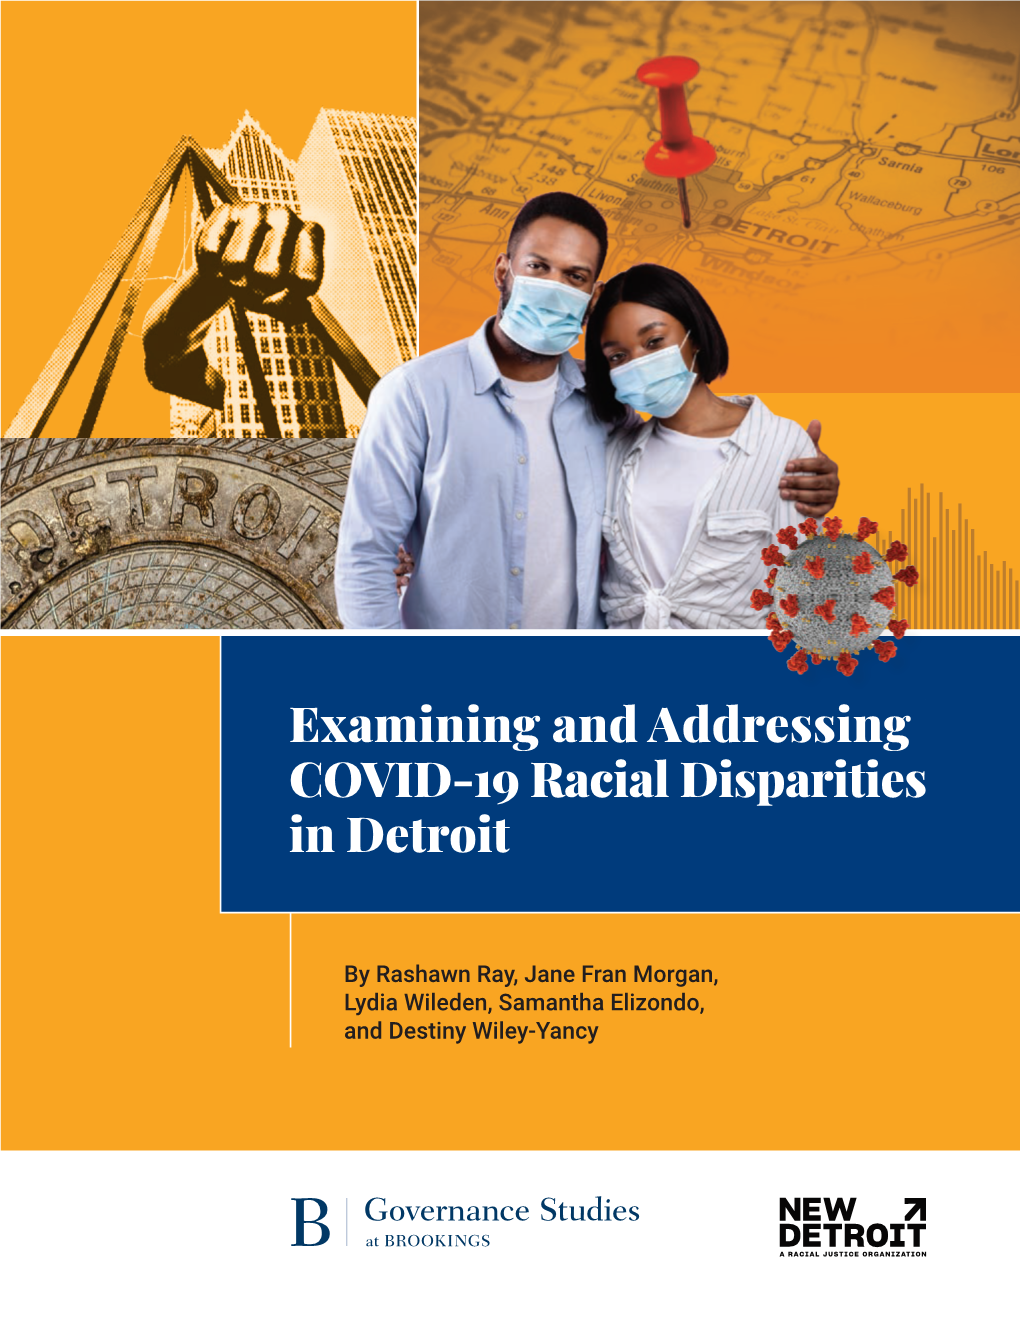 Examining and Addressing COVID-19 Racial Disparities in Detroit